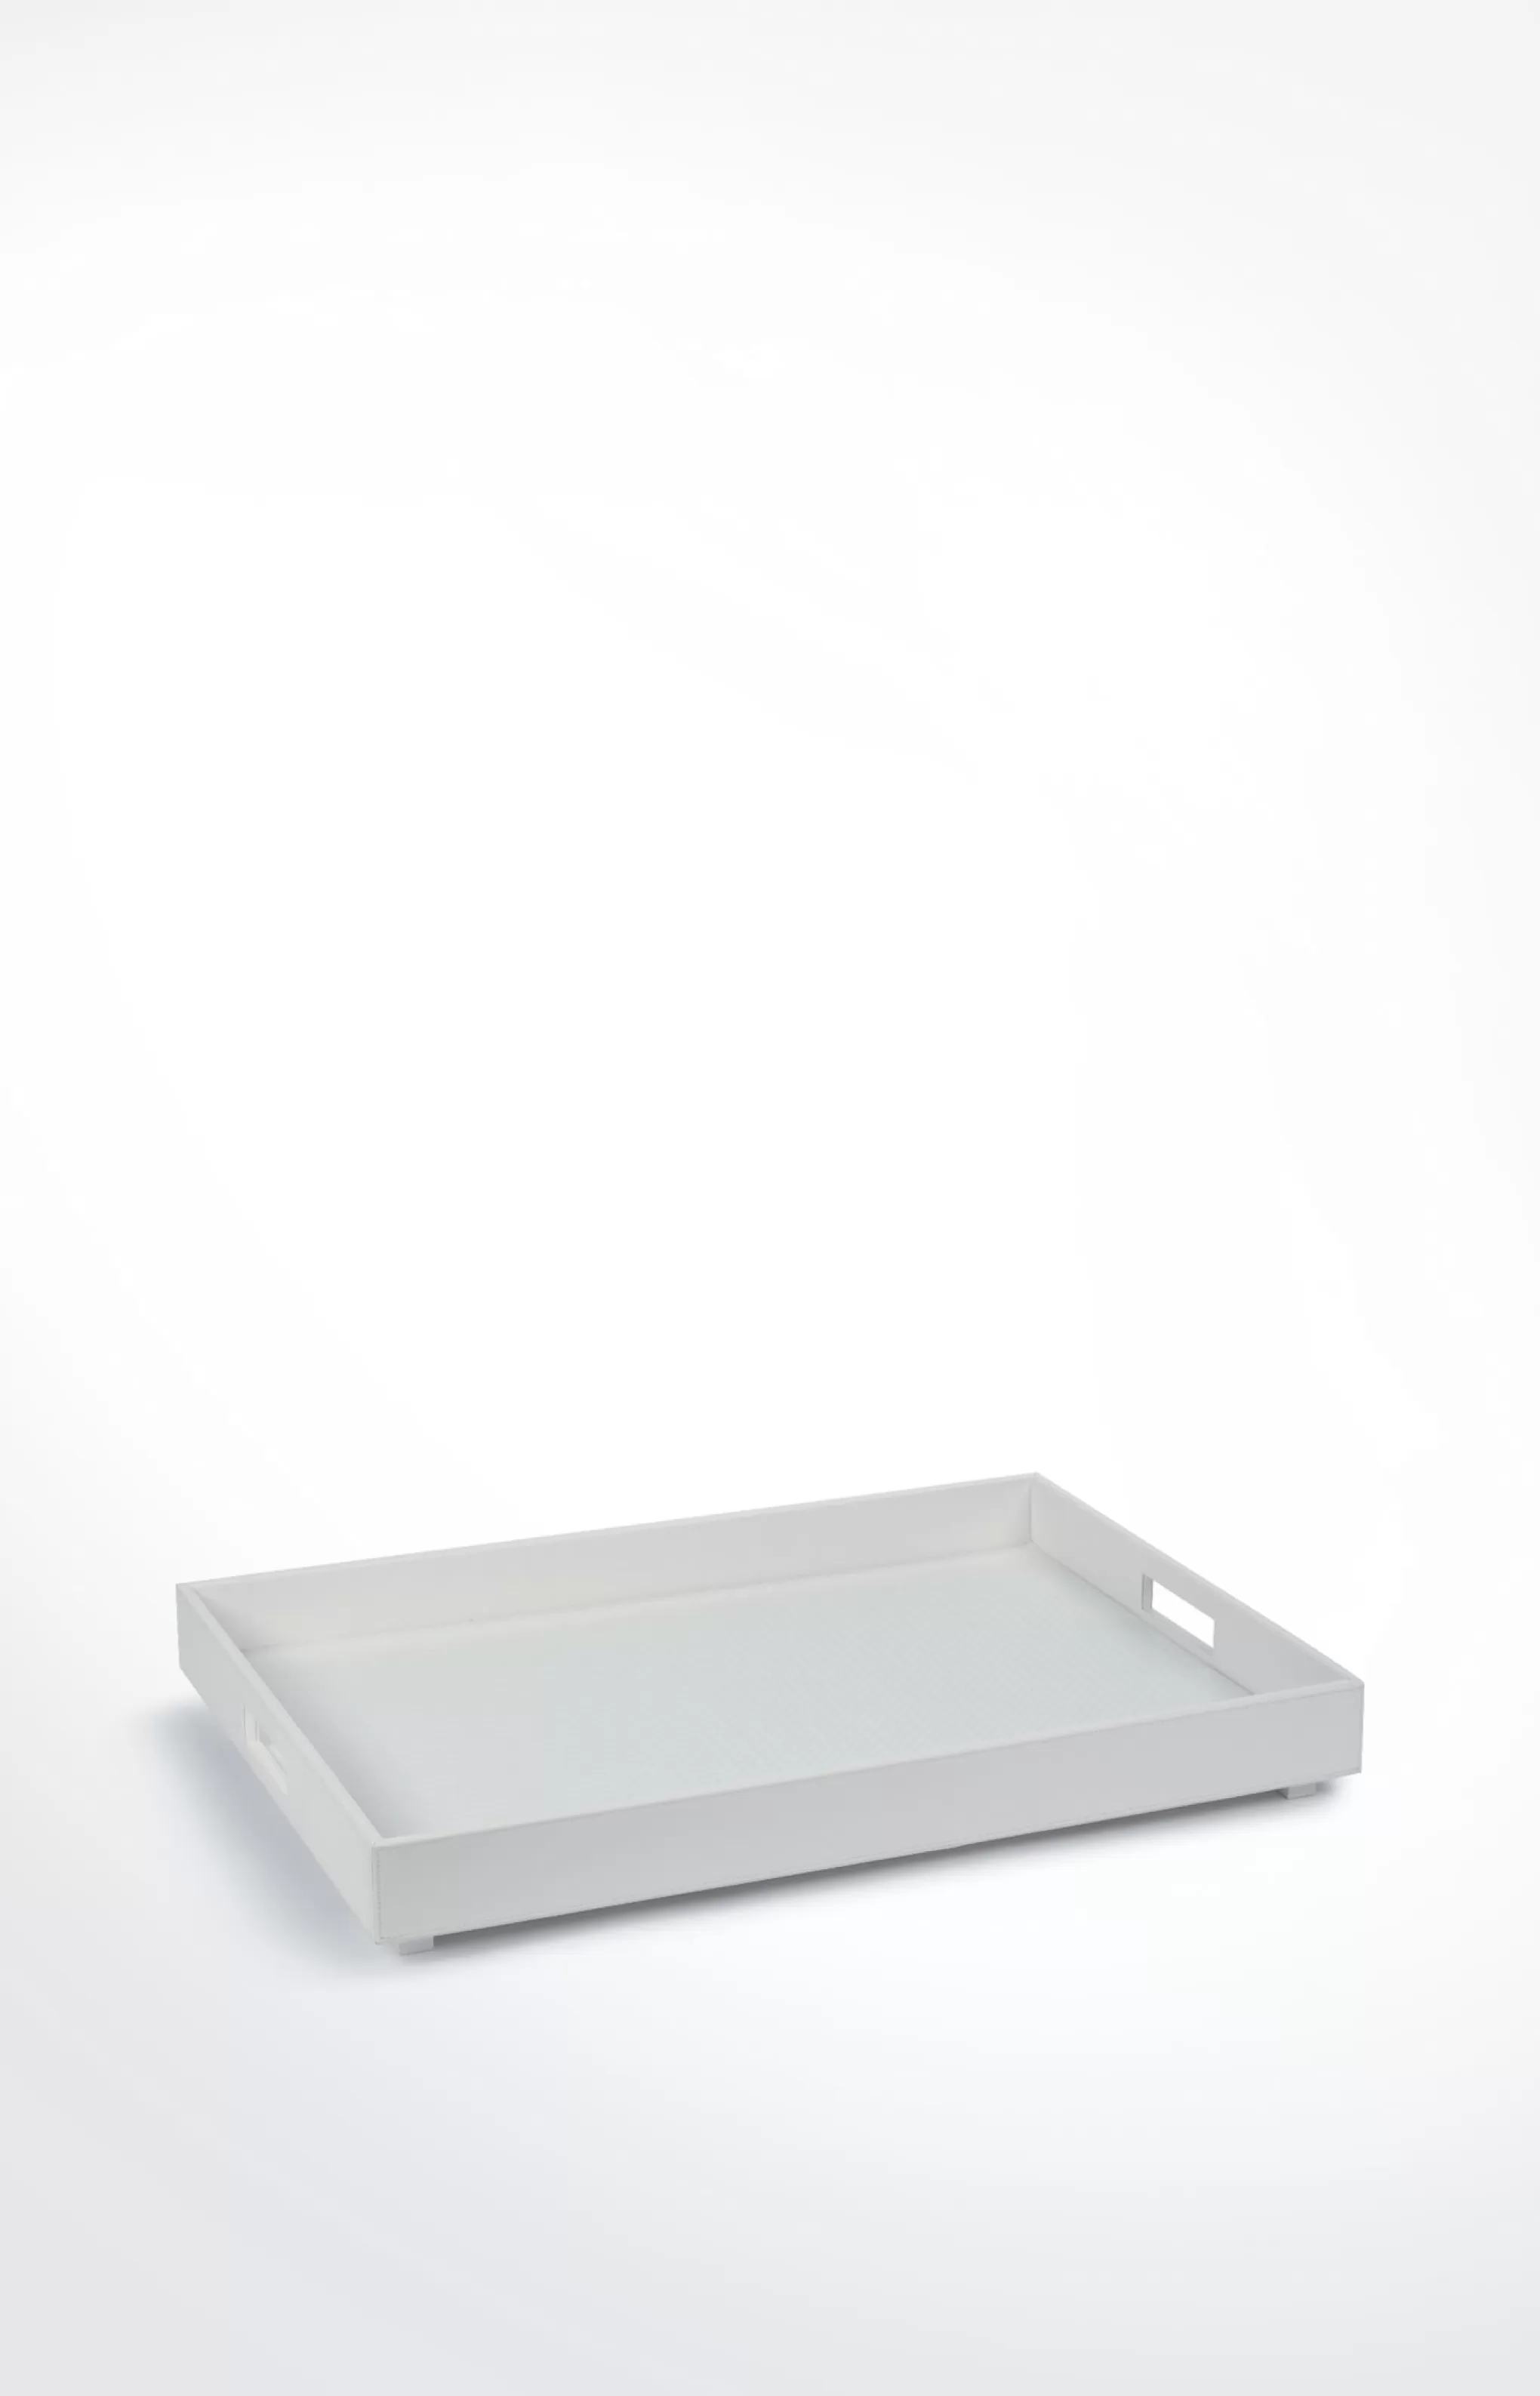 Bathroom Accessories | Discover Everything | Home Accessories | Table Accessories*JOOP Bathroom Accessories | Discover Everything | Home Accessories | Table Accessories Large homeline tray, white